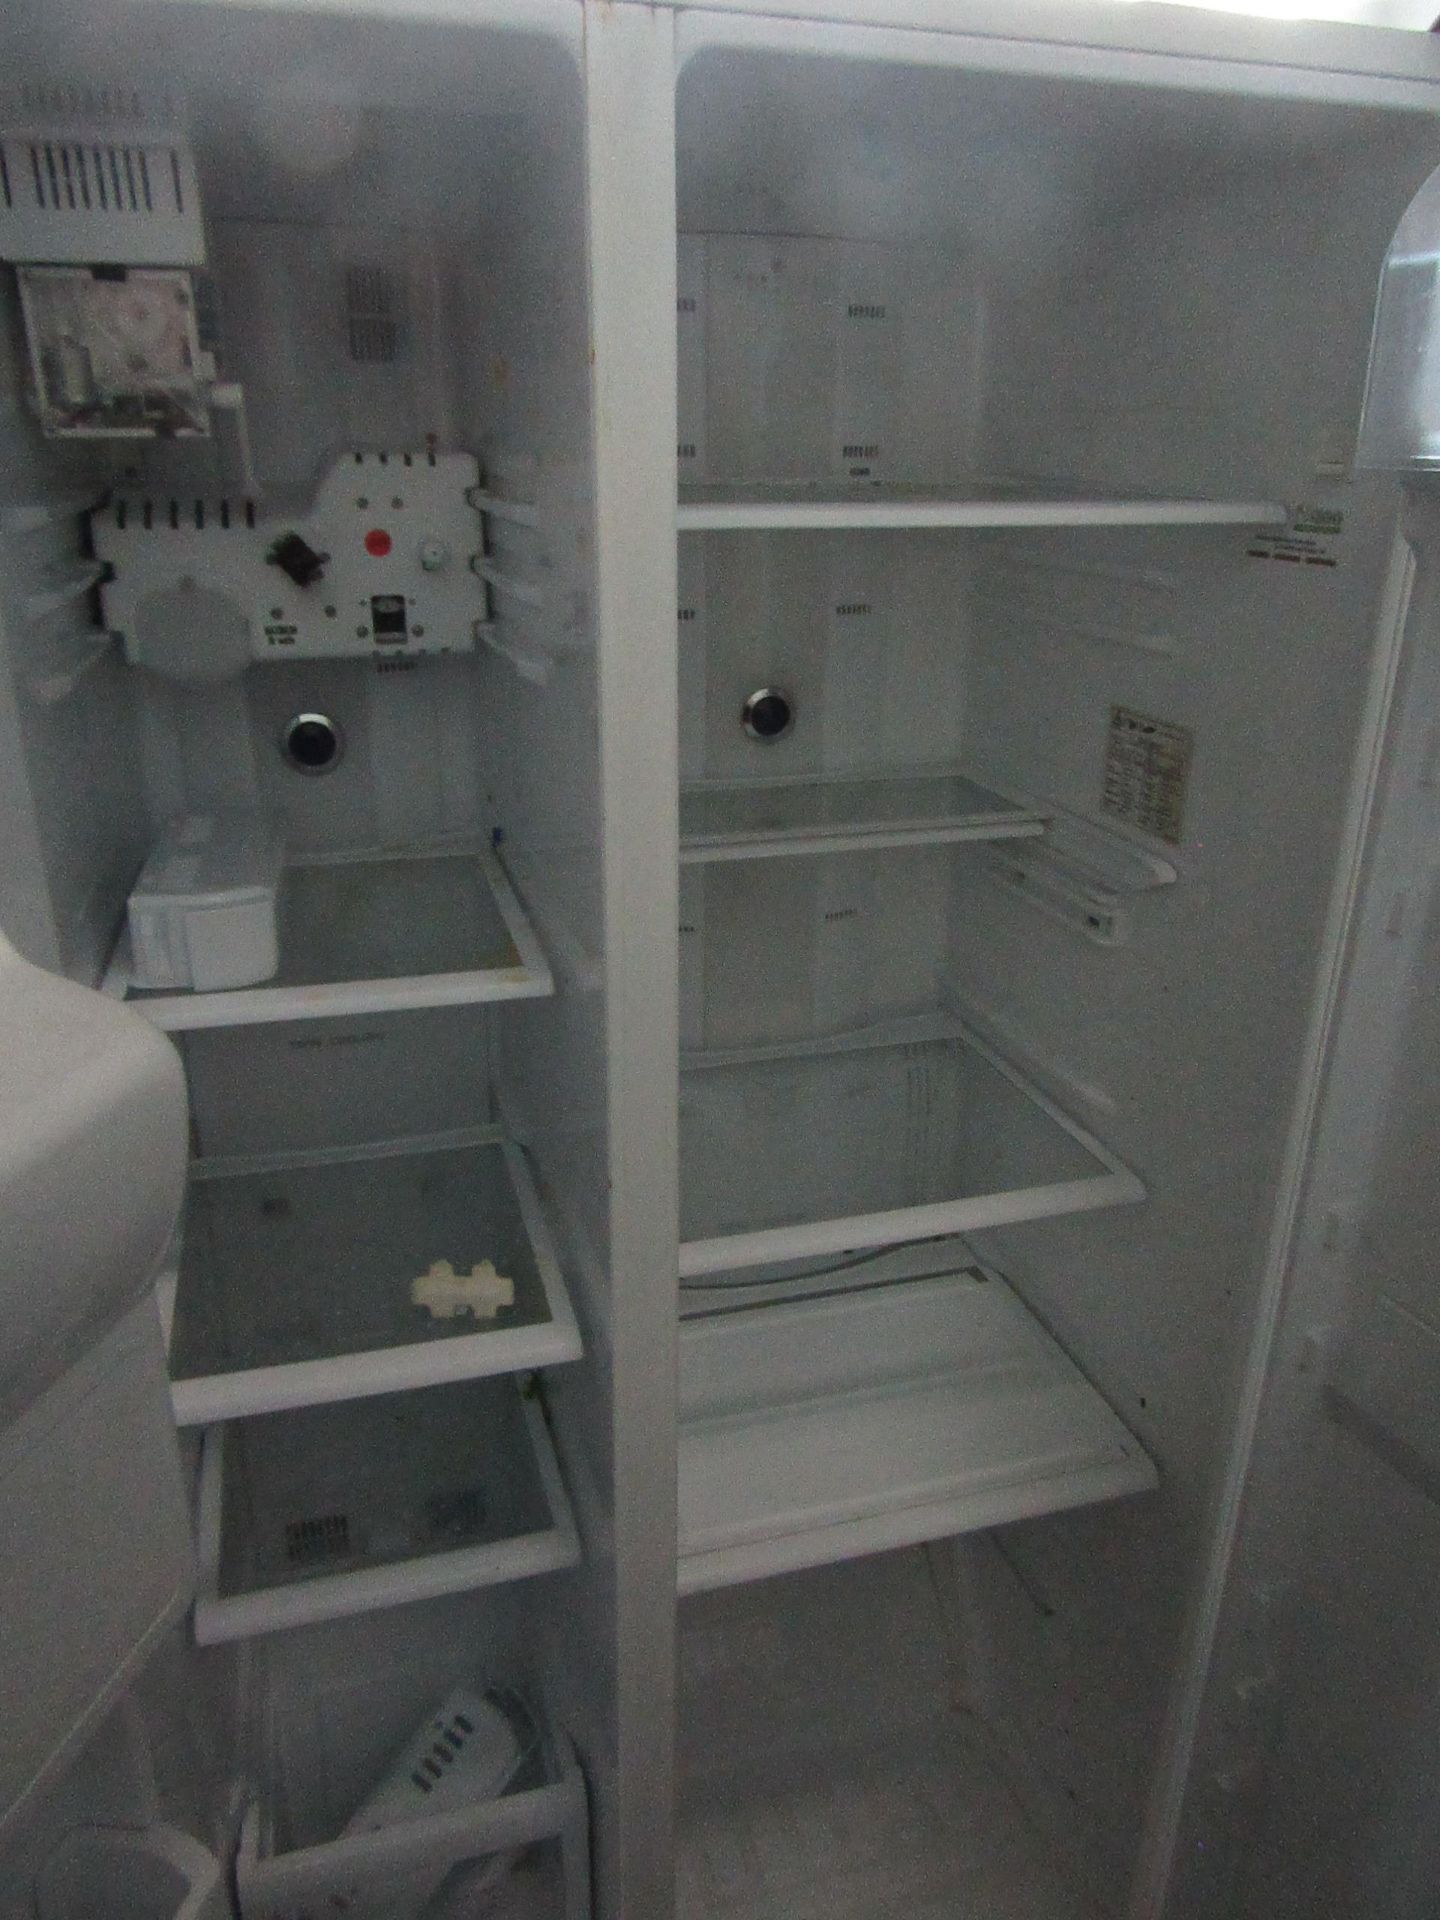 Samsung American Fridge freezer, heavily used and the plug has been cut off so unable to checkl - Image 2 of 2